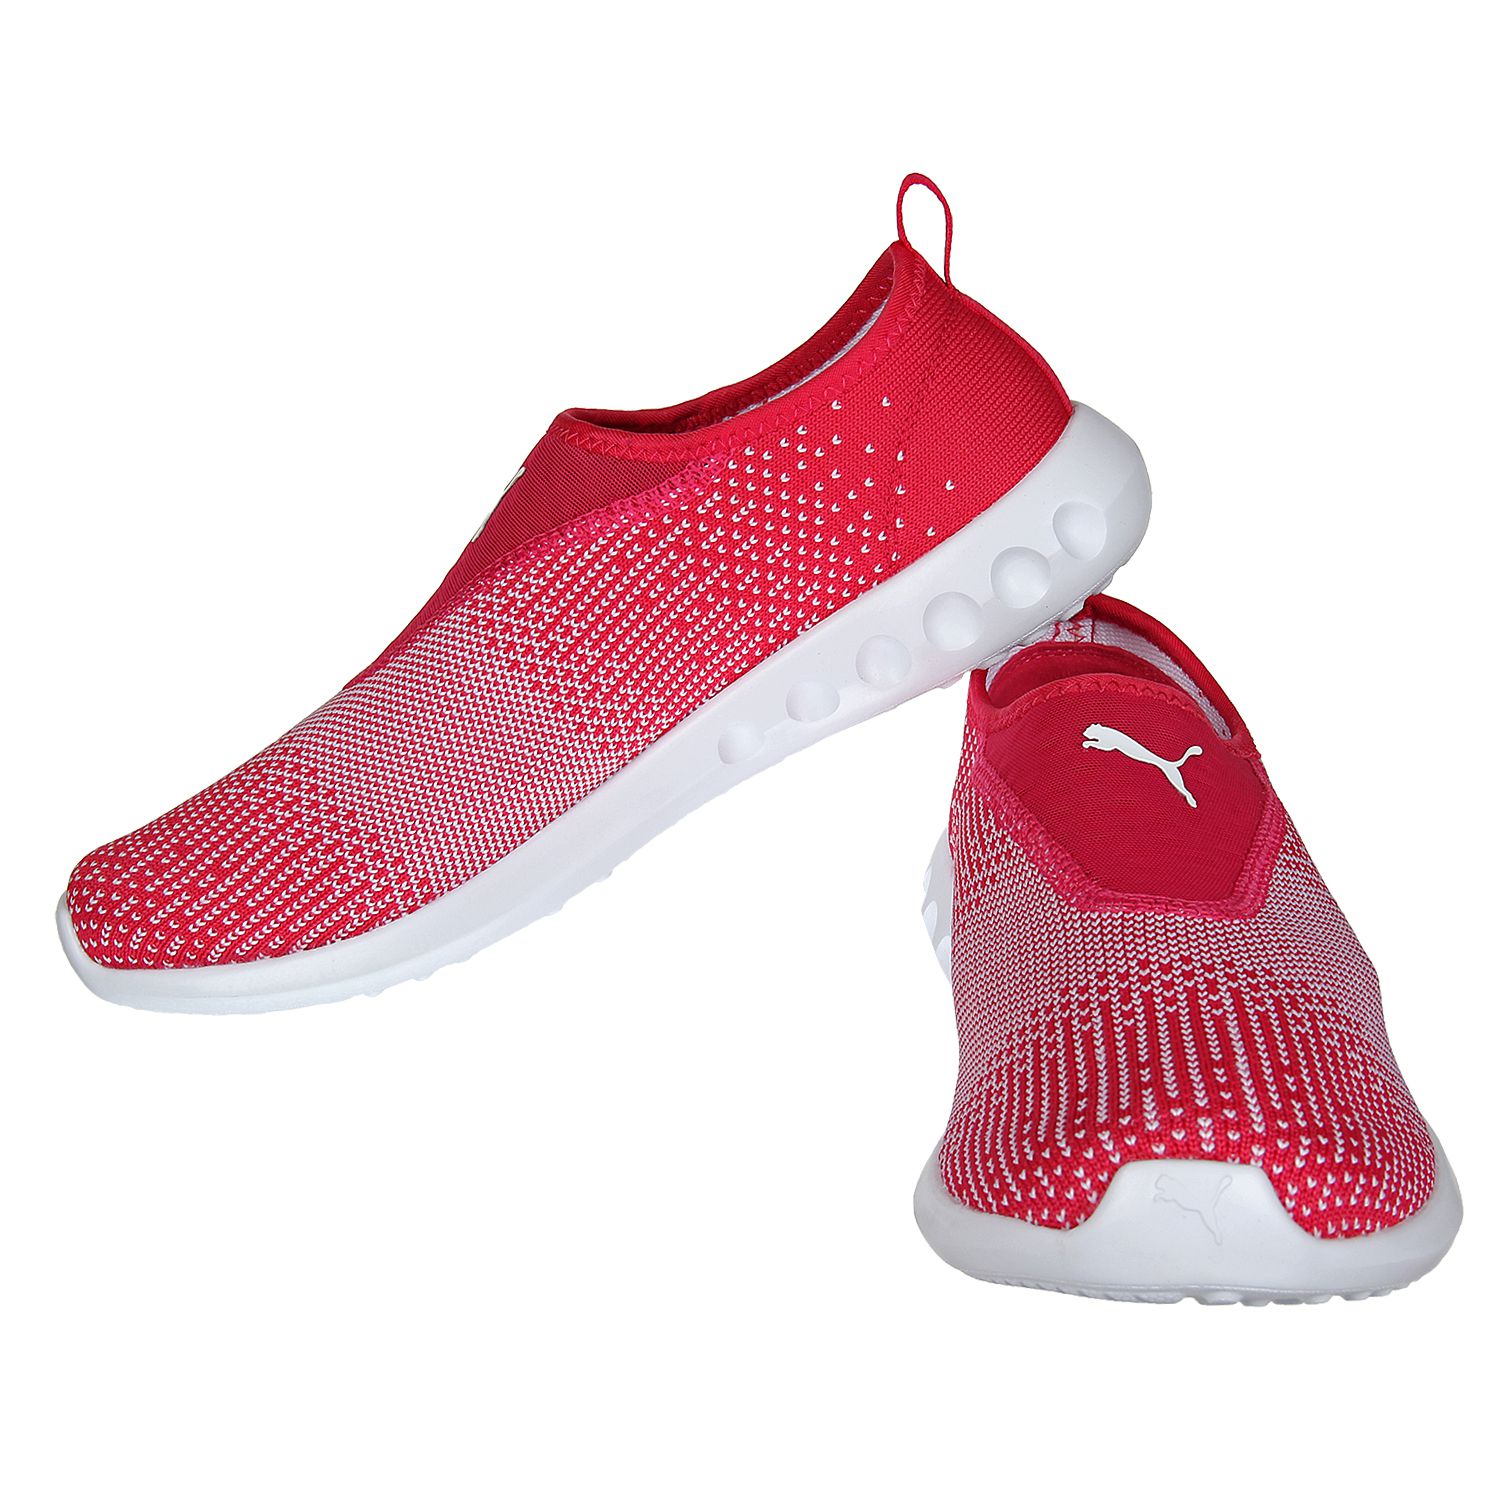 Puma Pink Running Shoes Price in India Buy Puma Pink